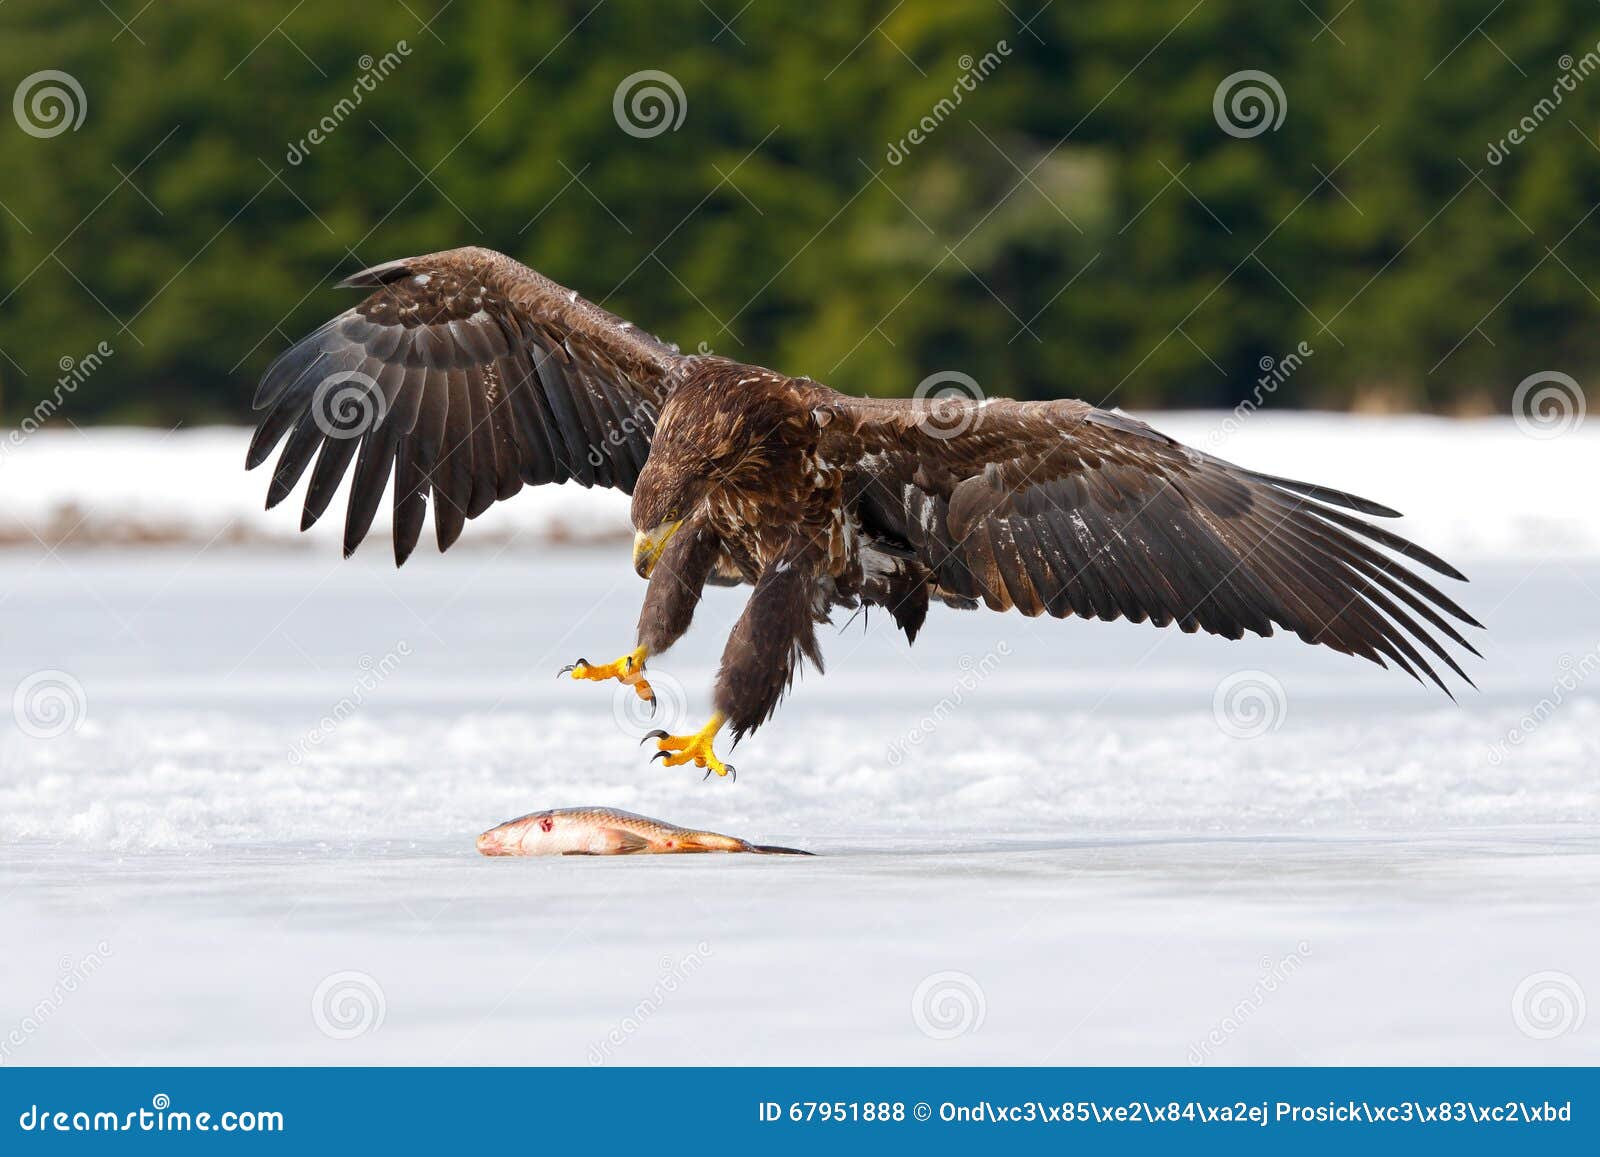 Golden Eagle with Catch Fish in Snowy Winter, Snow in the Forest